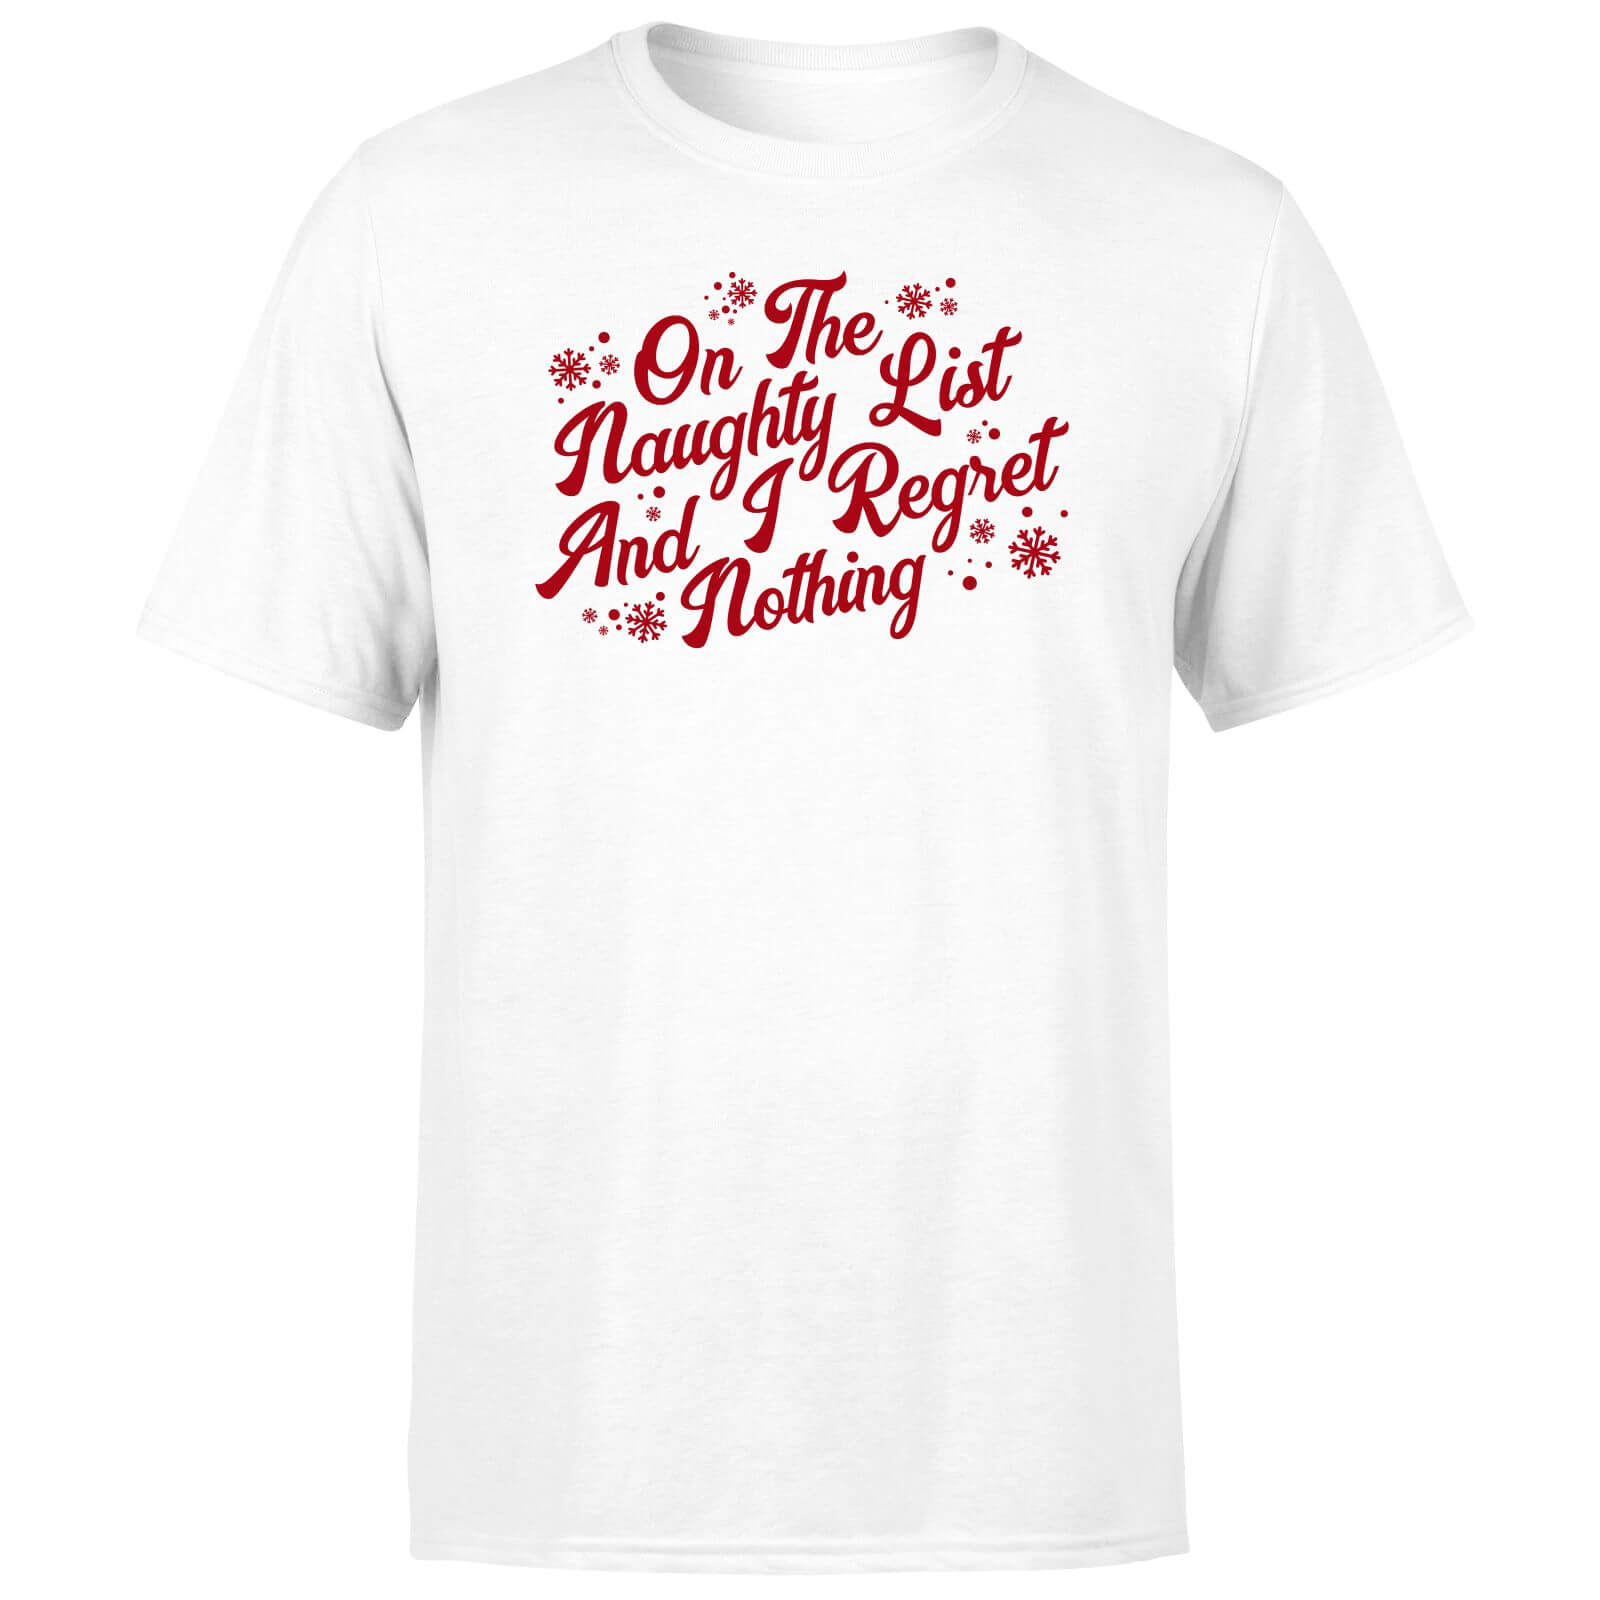 On The Naughty List And I Regret Nothing Men's T-Shirt - White - M - White